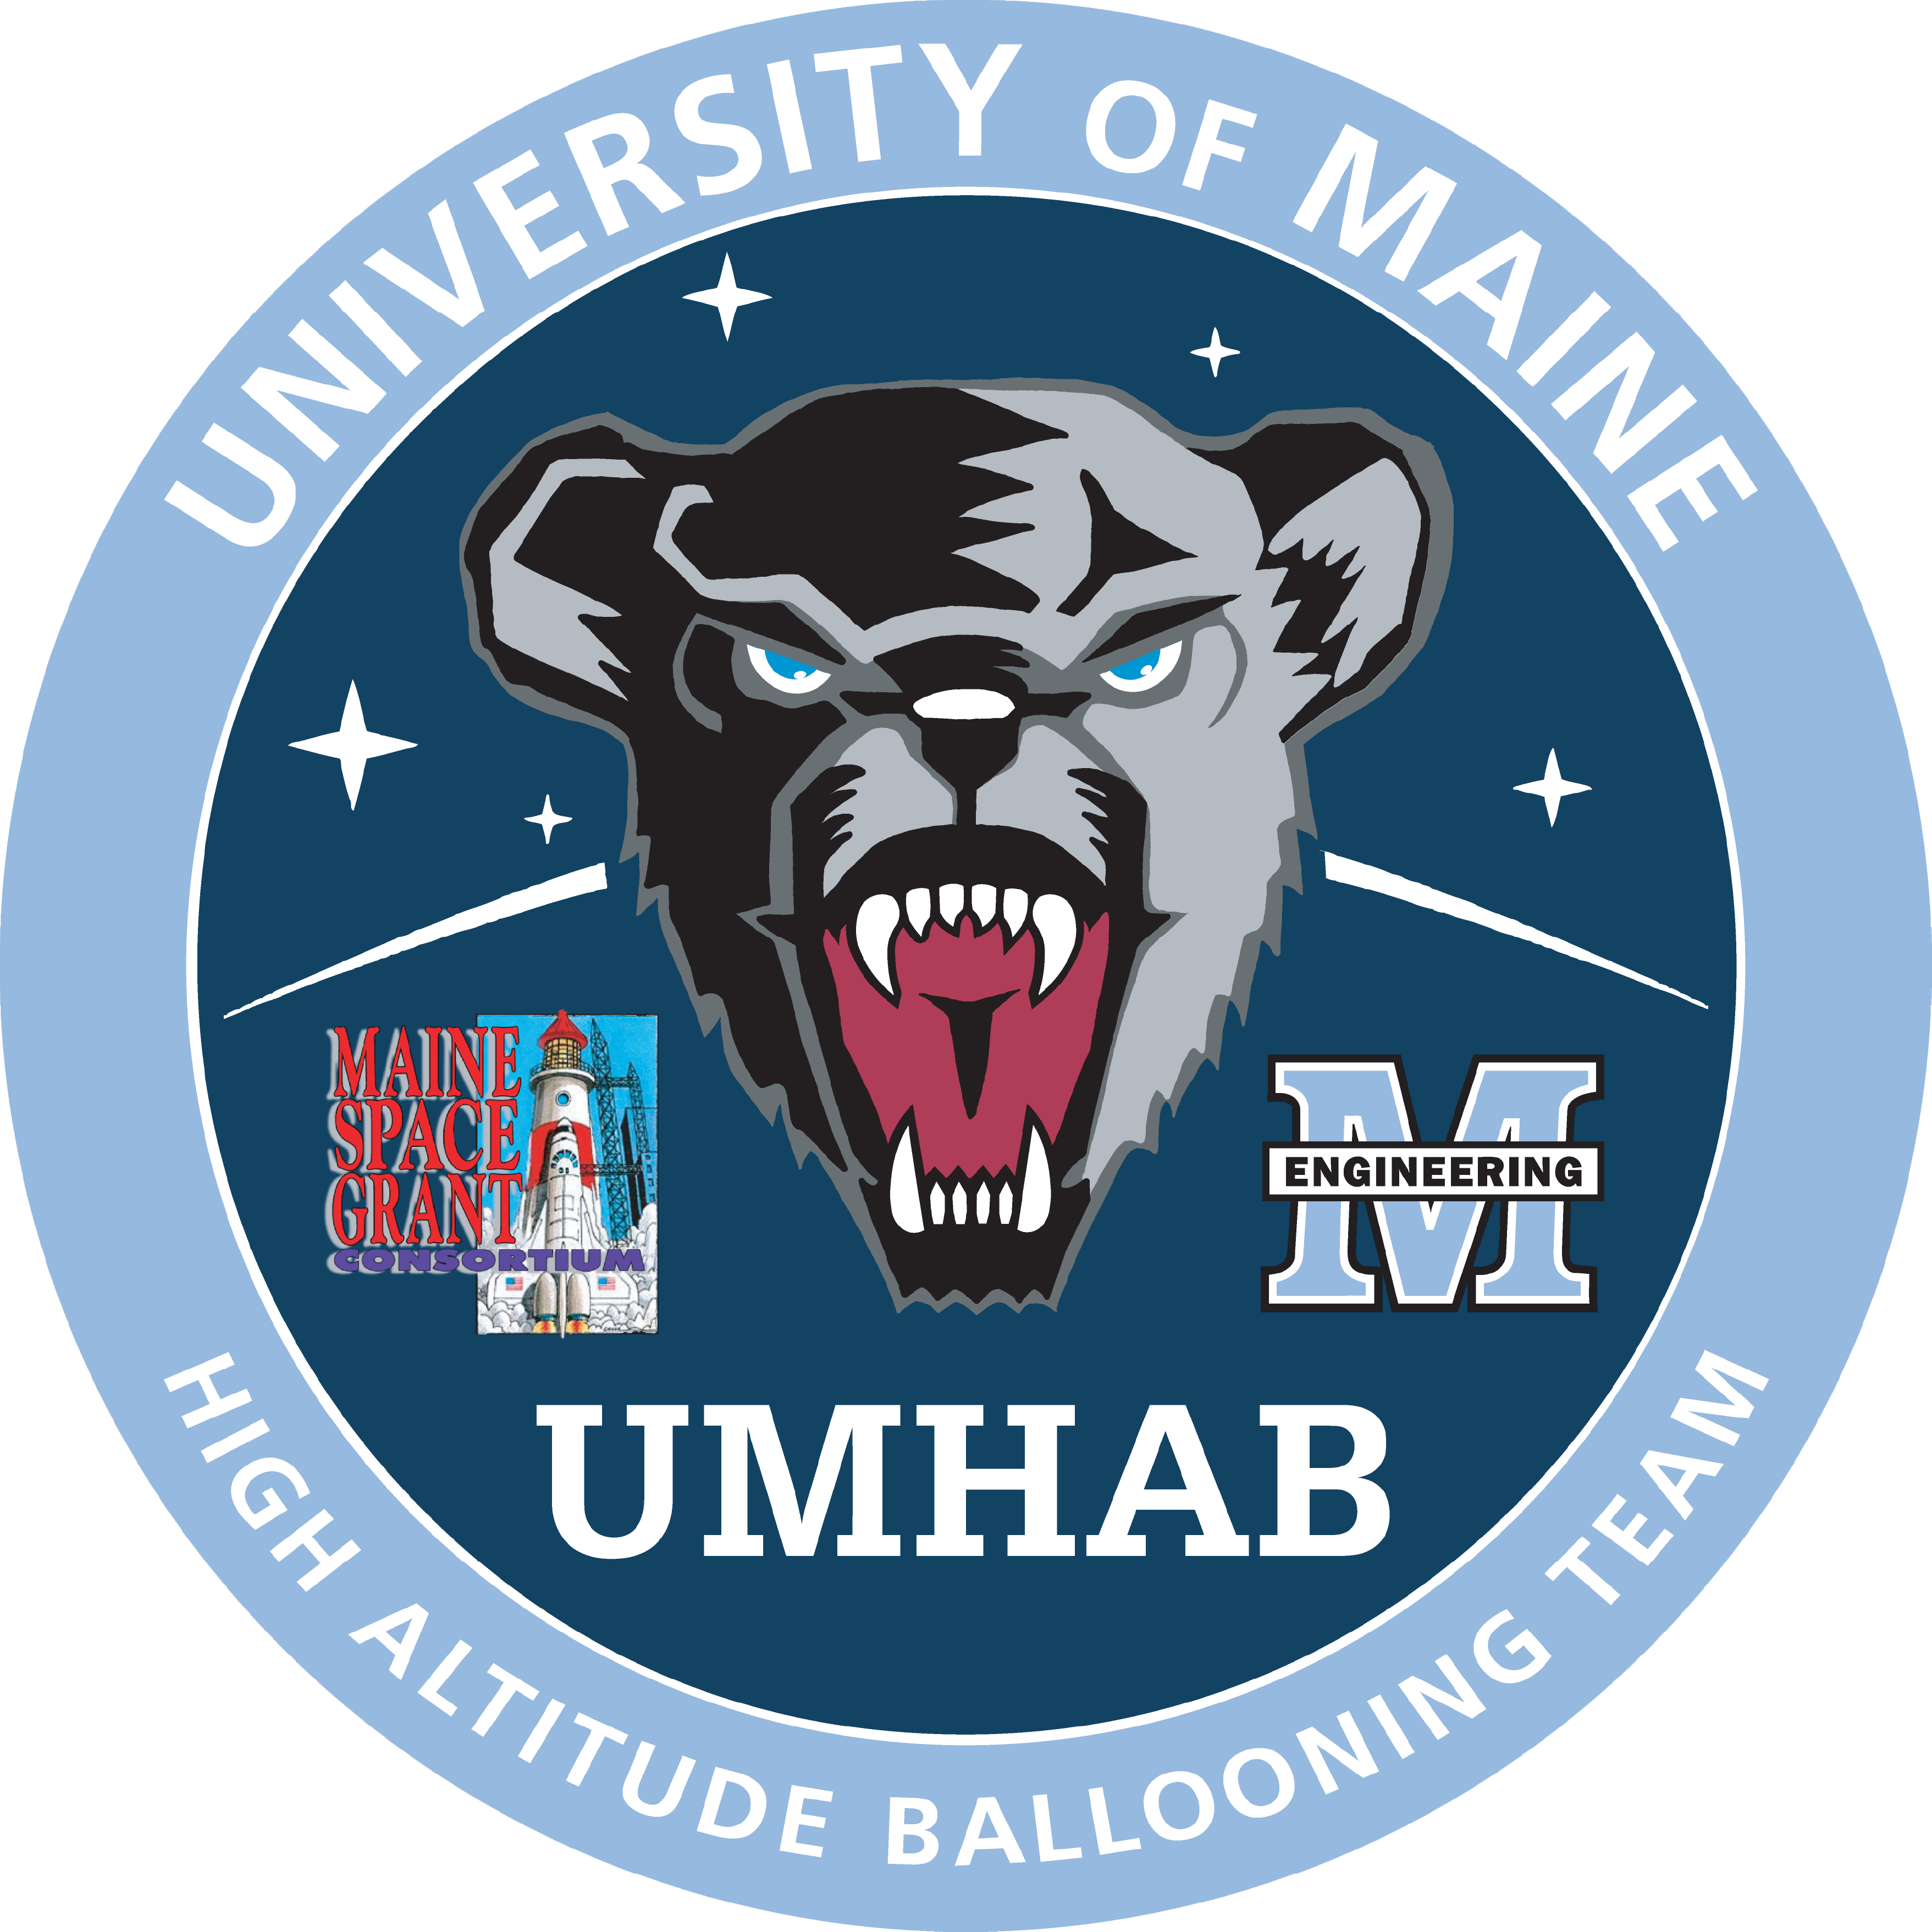 a circular blue logo featuring a bear, Main Space Grant consortium, engineering, and UMHAB text in the center. Perimeter text reads, "University of Maine High altitude ballooning team"